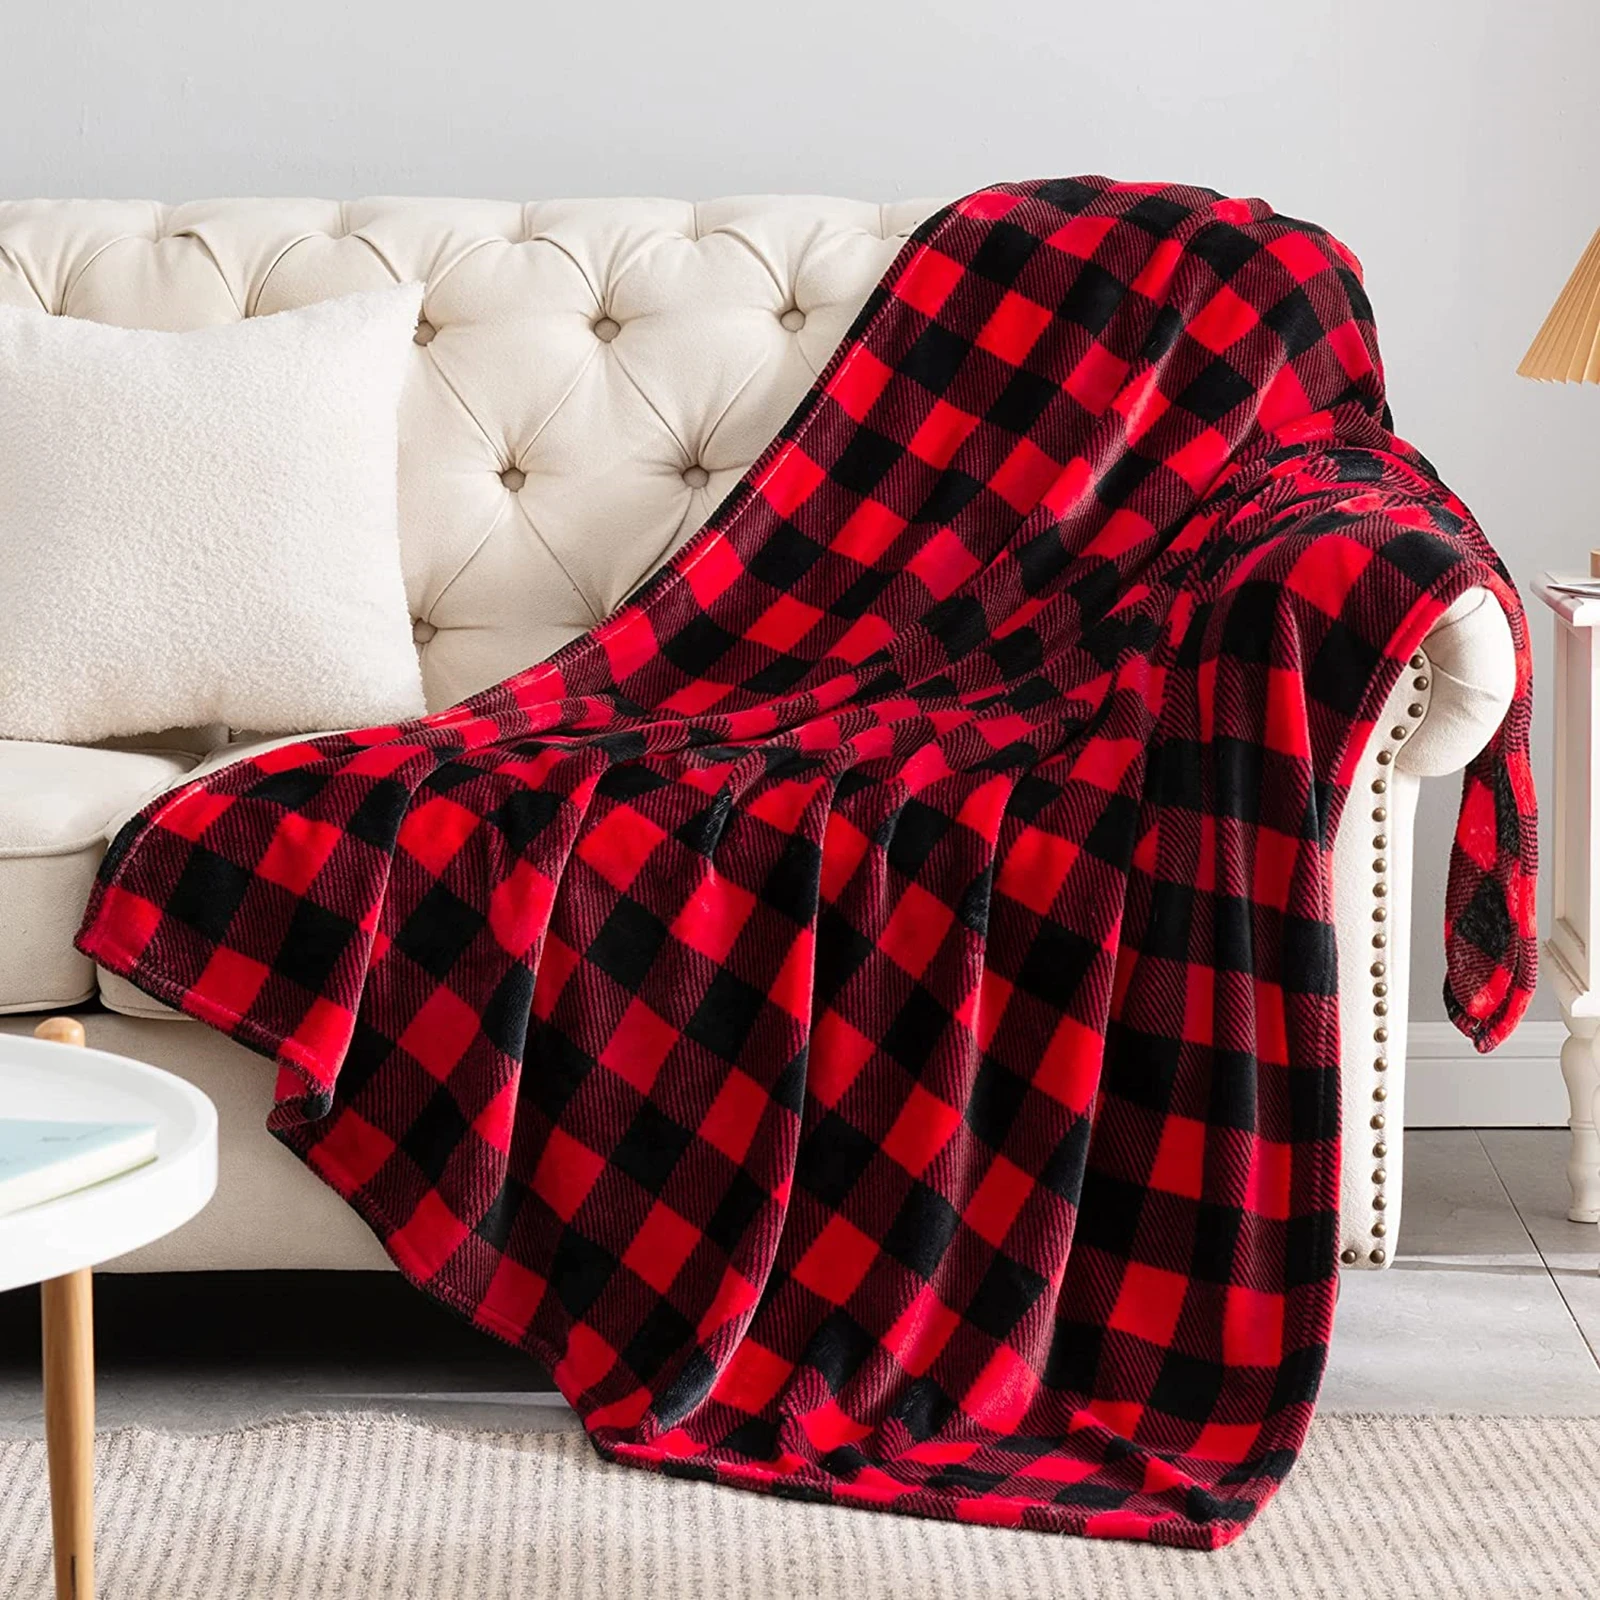 Small Size Flannel Throw Blanket for Couch Sofa Bed Buffalo Plaid Checkered Blanket Cozy Fuzzy Soft Lightweight Blanket 70×100cm